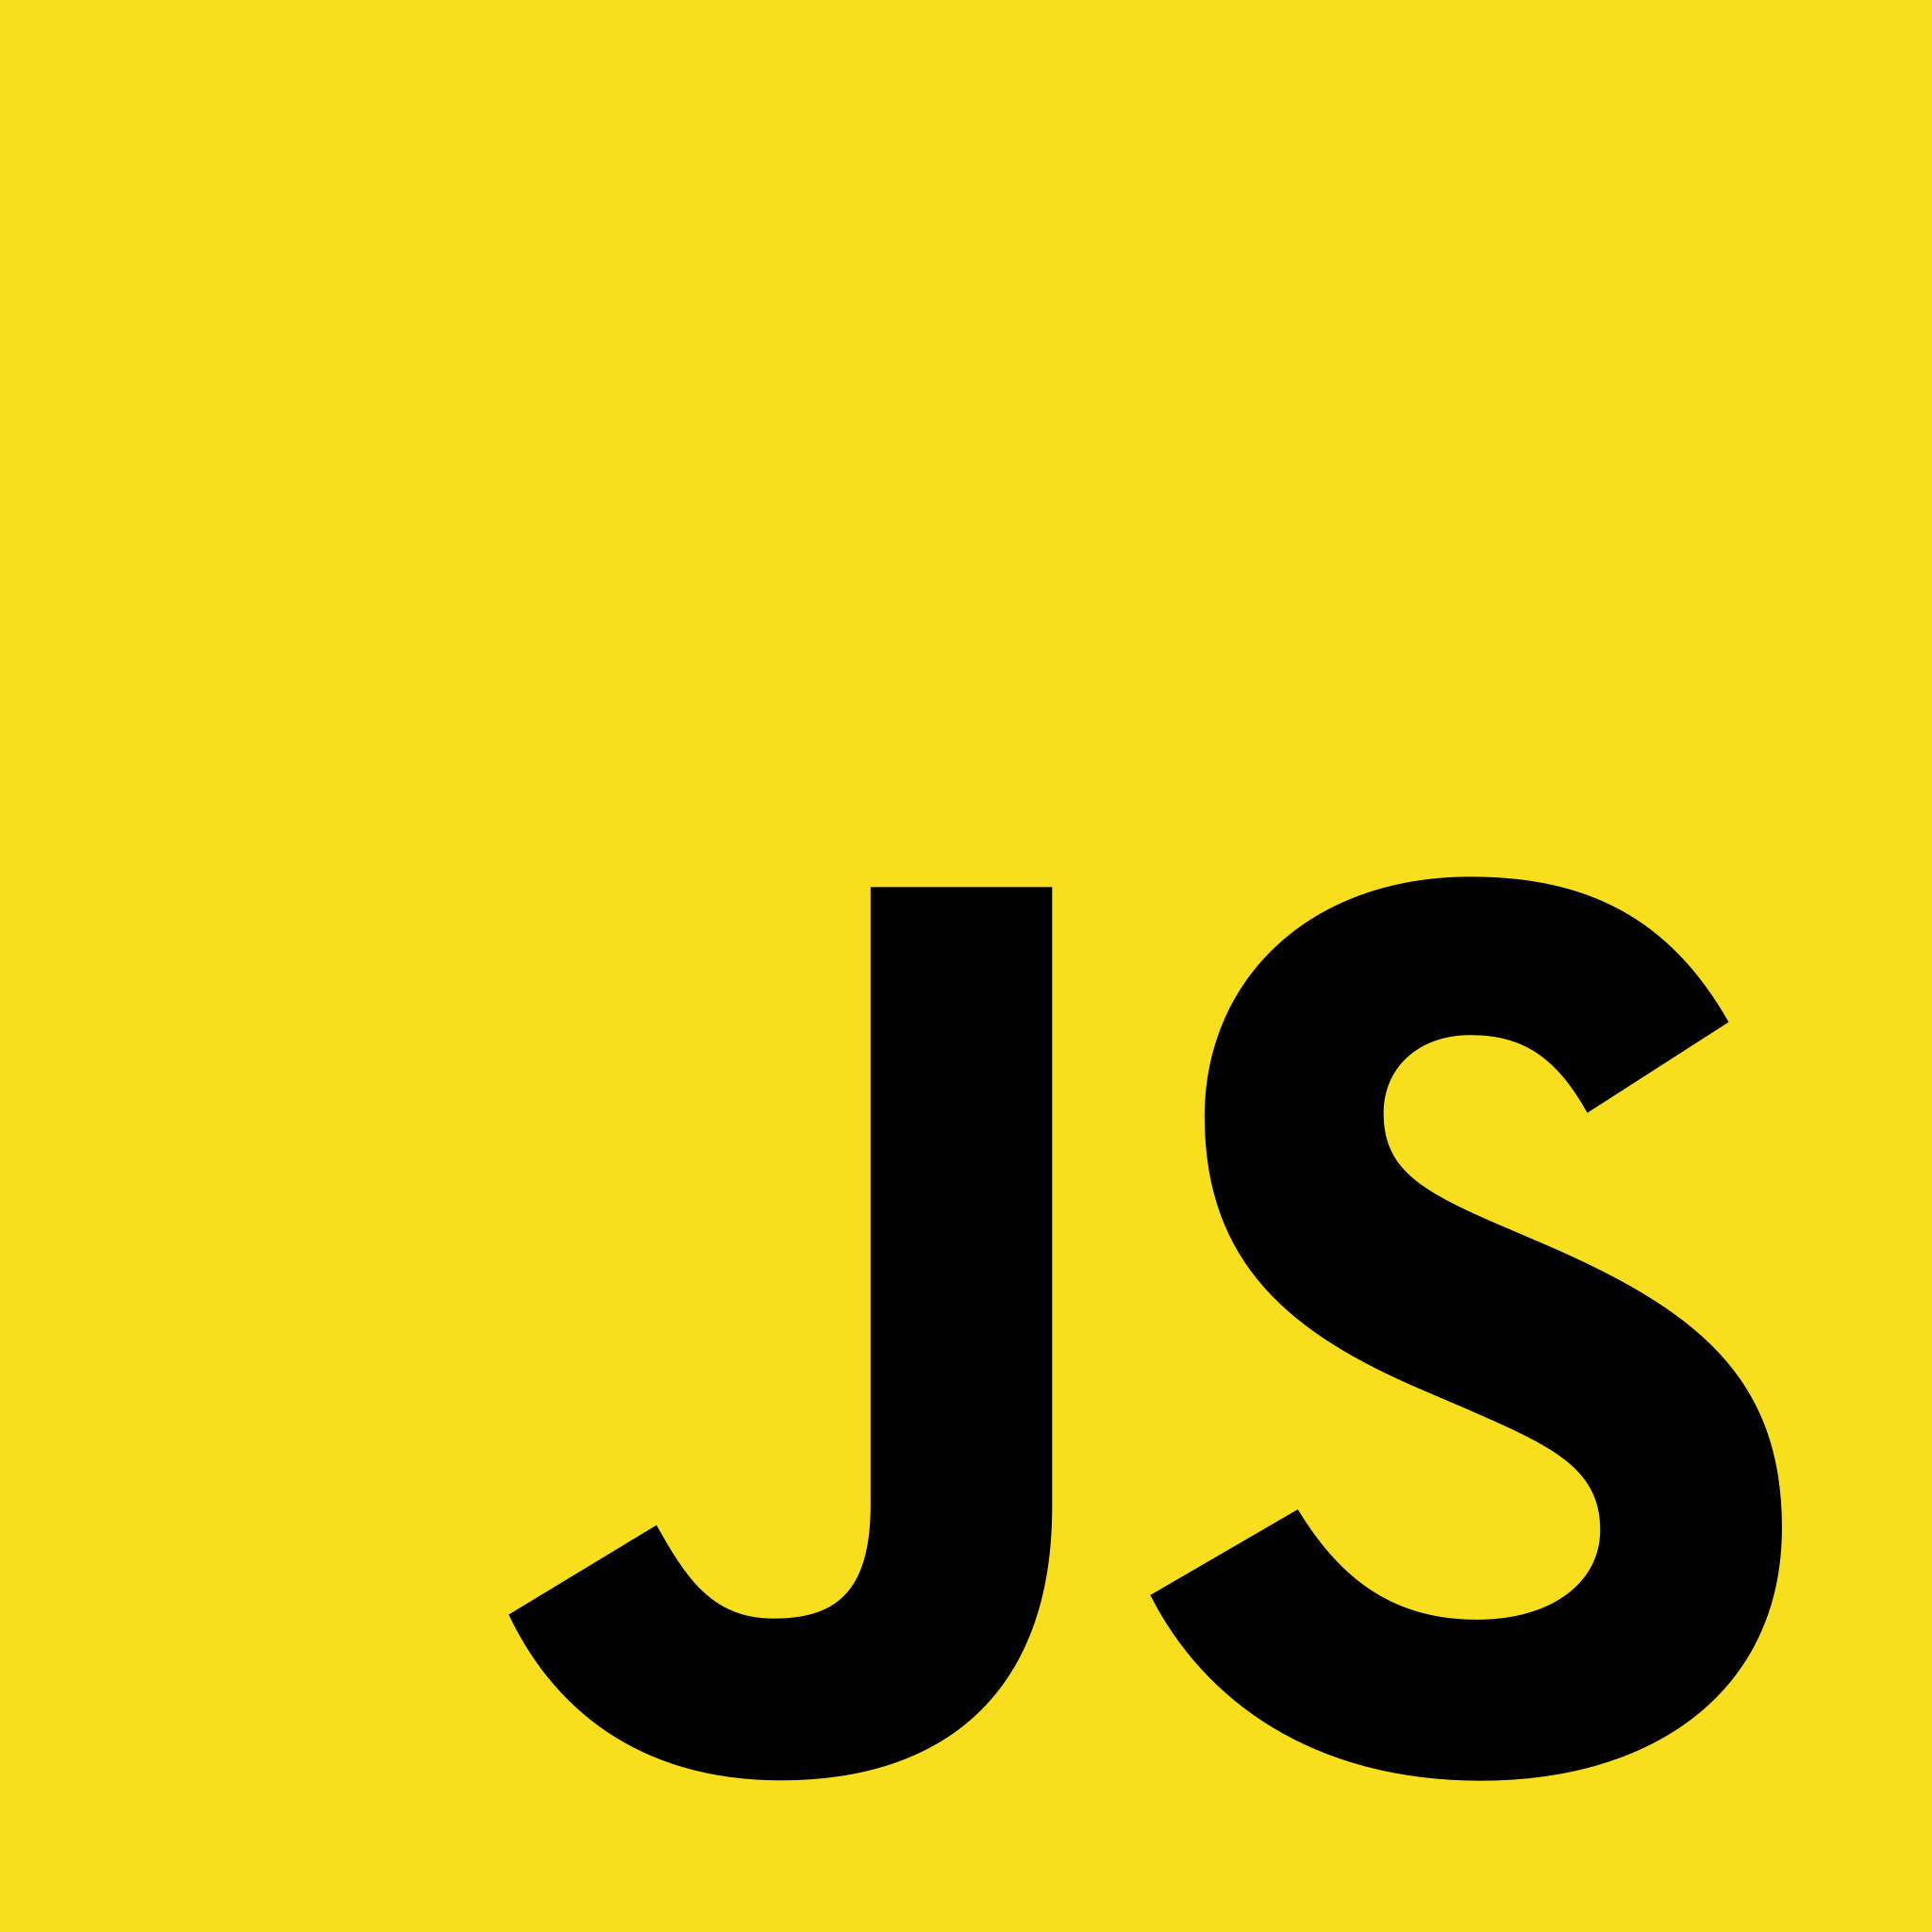 File:Unofficial JavaScript logo 2.svg - Wikimedia Commons